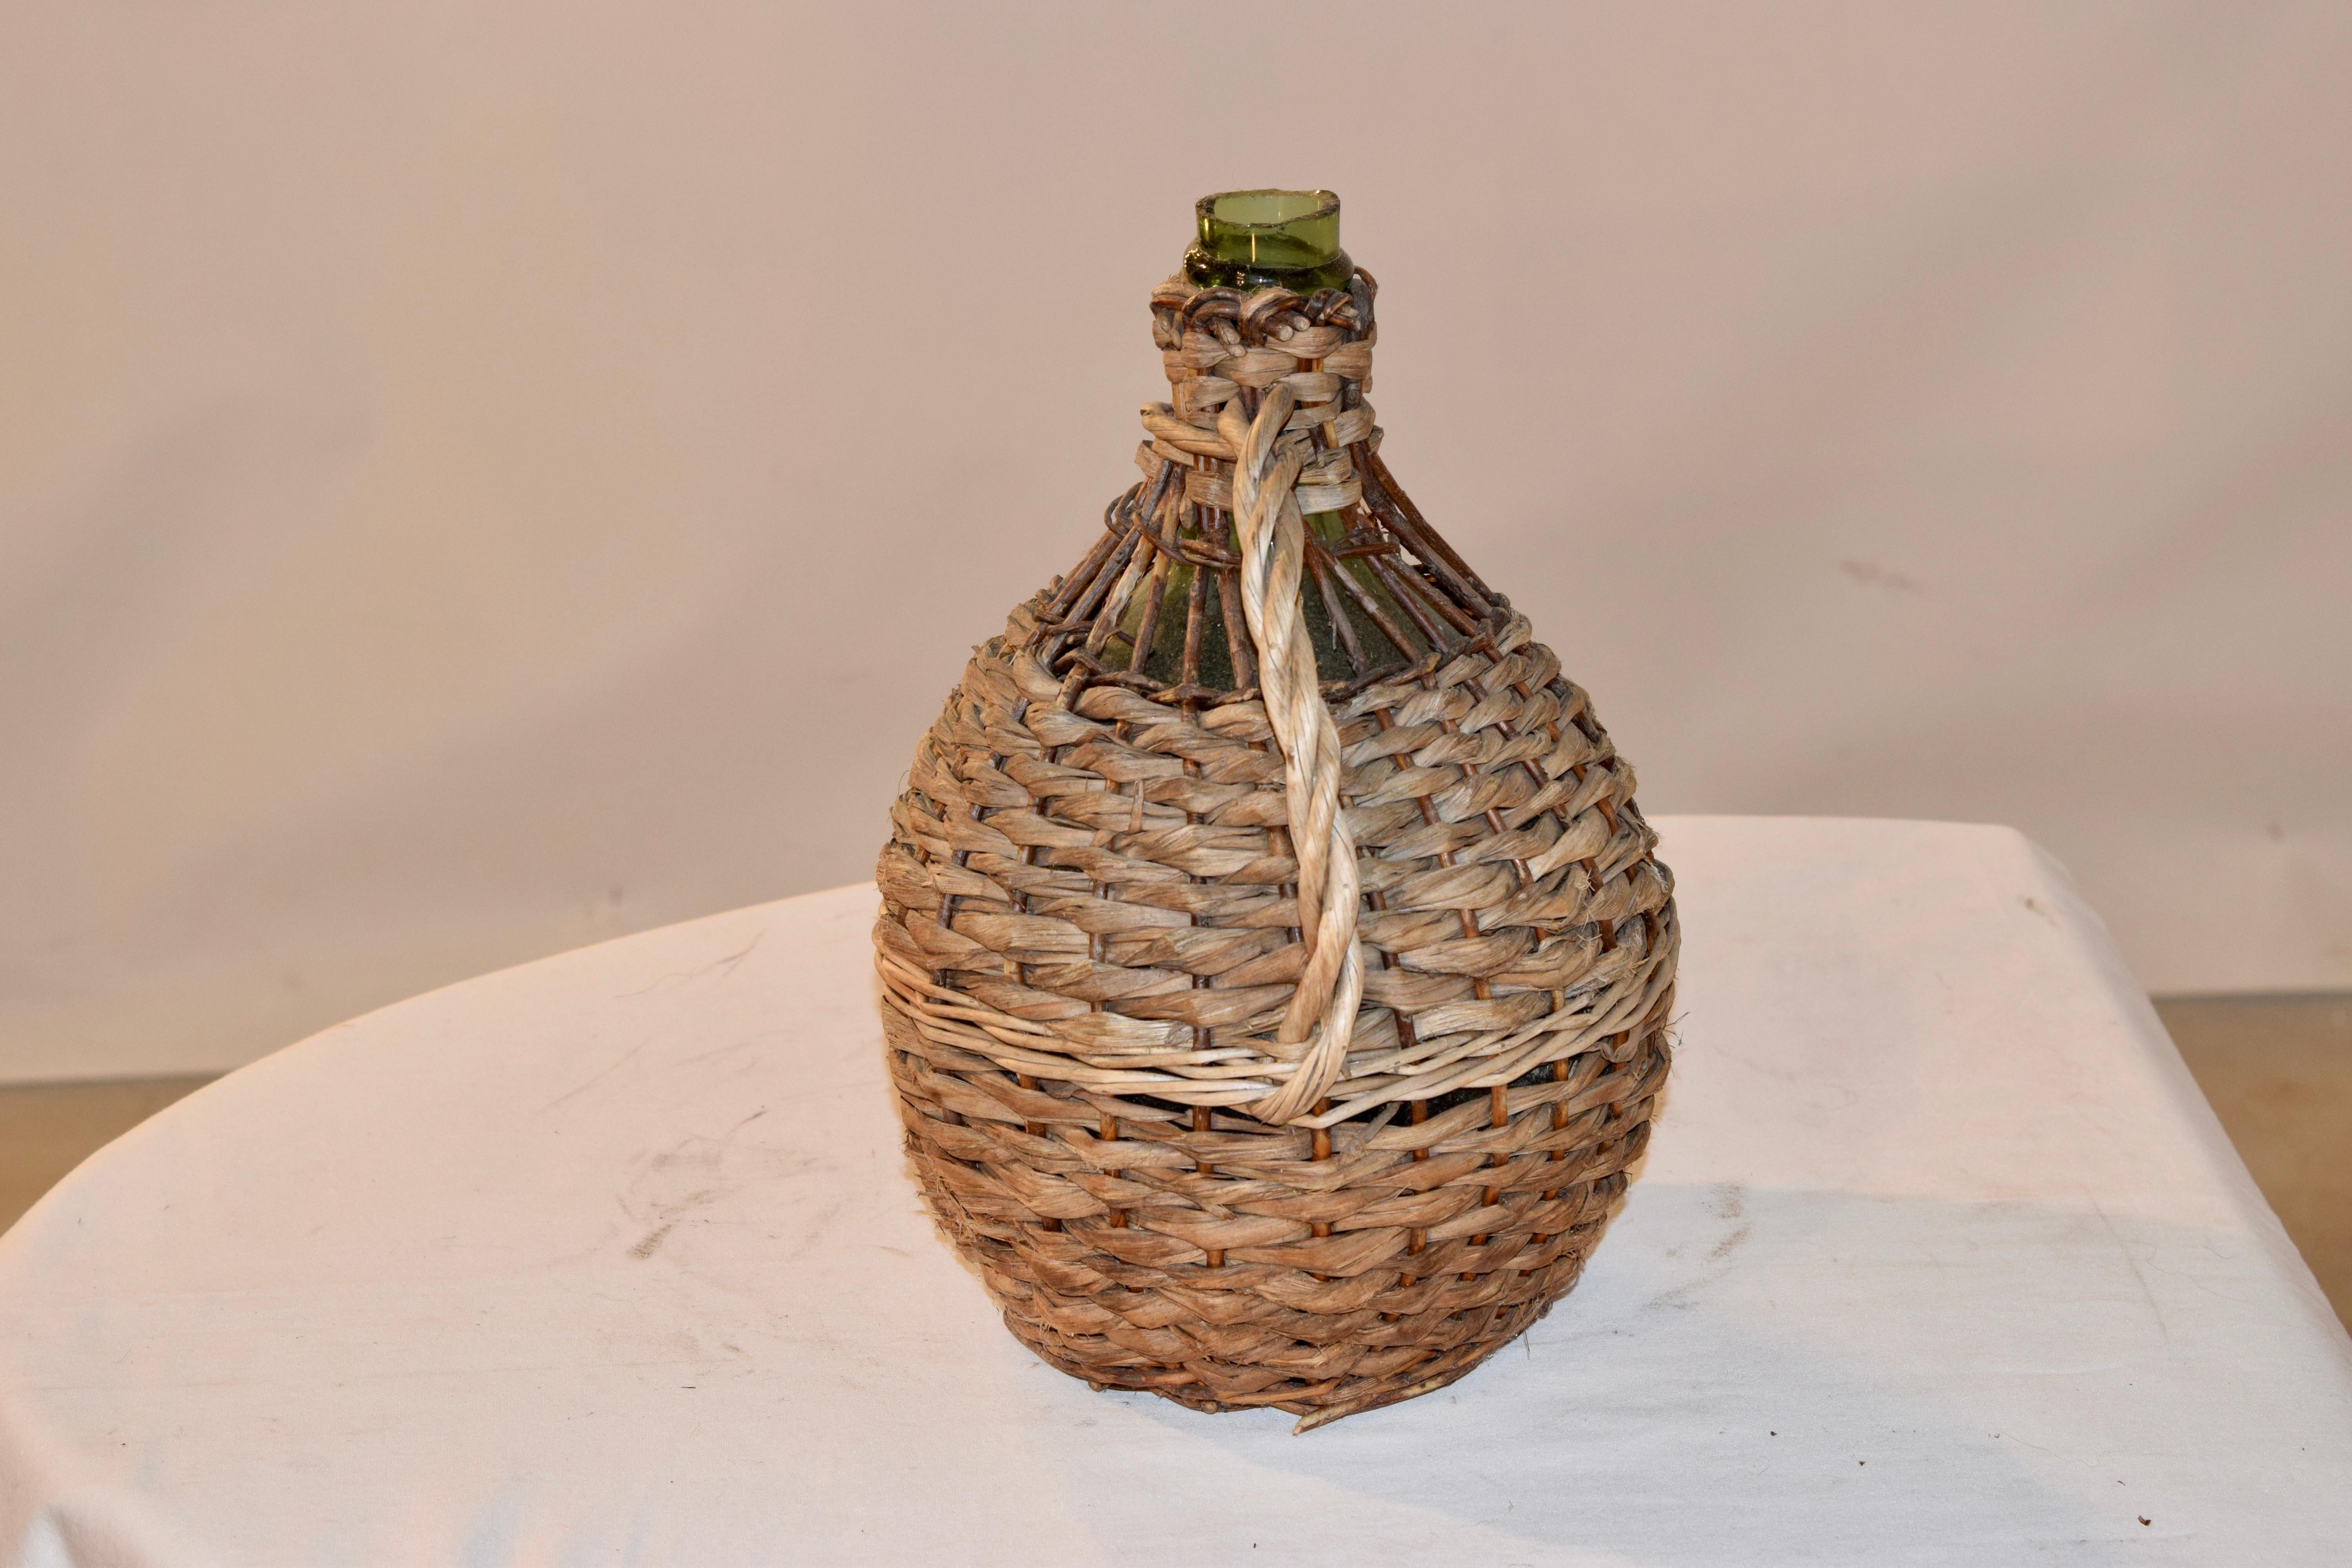 A small 19th century French globular form hand blown green glass demijohn bottle encased in original wicker frame and hand braided rope. The layers of rope and wicker create an interesting texture. A wonderful sculptural object with beautiful old